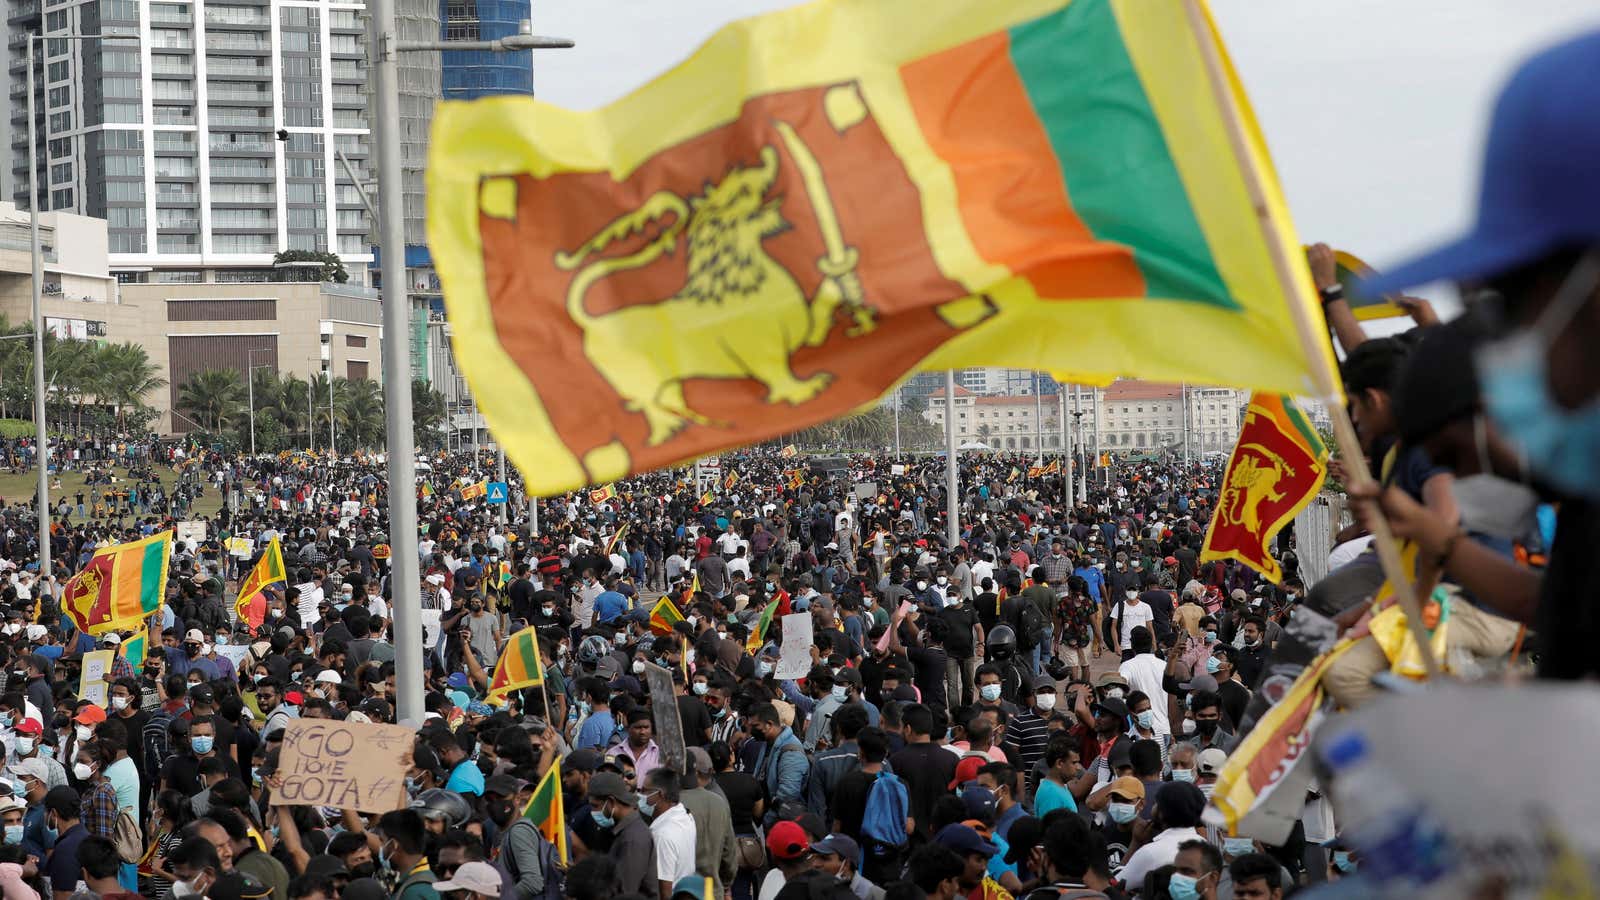 An economic crisis has sparked widespread anti-government protests in Sri Lanka.